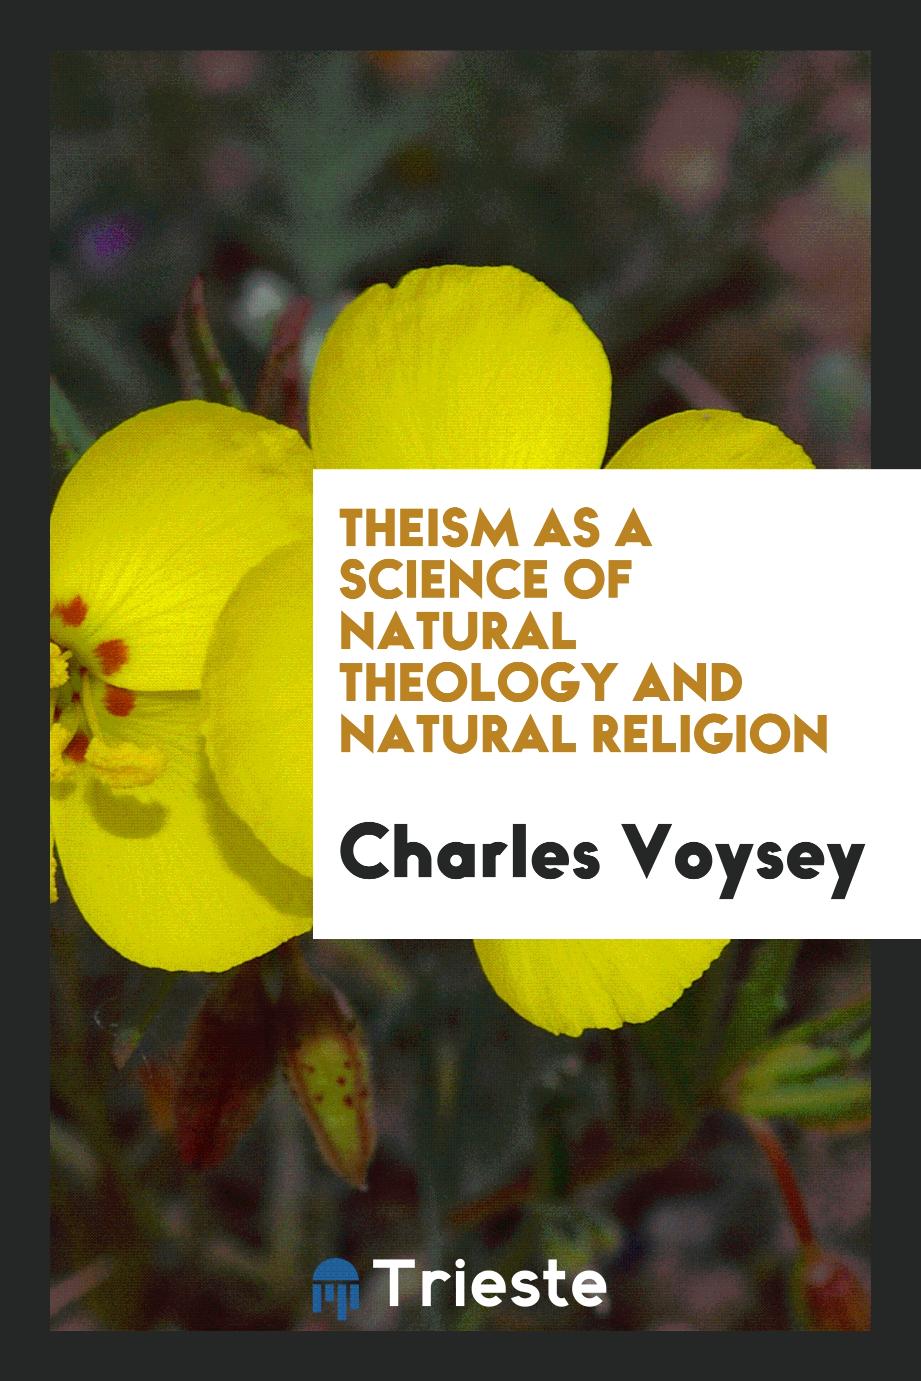 Theism as a Science of Natural Theology and Natural Religion